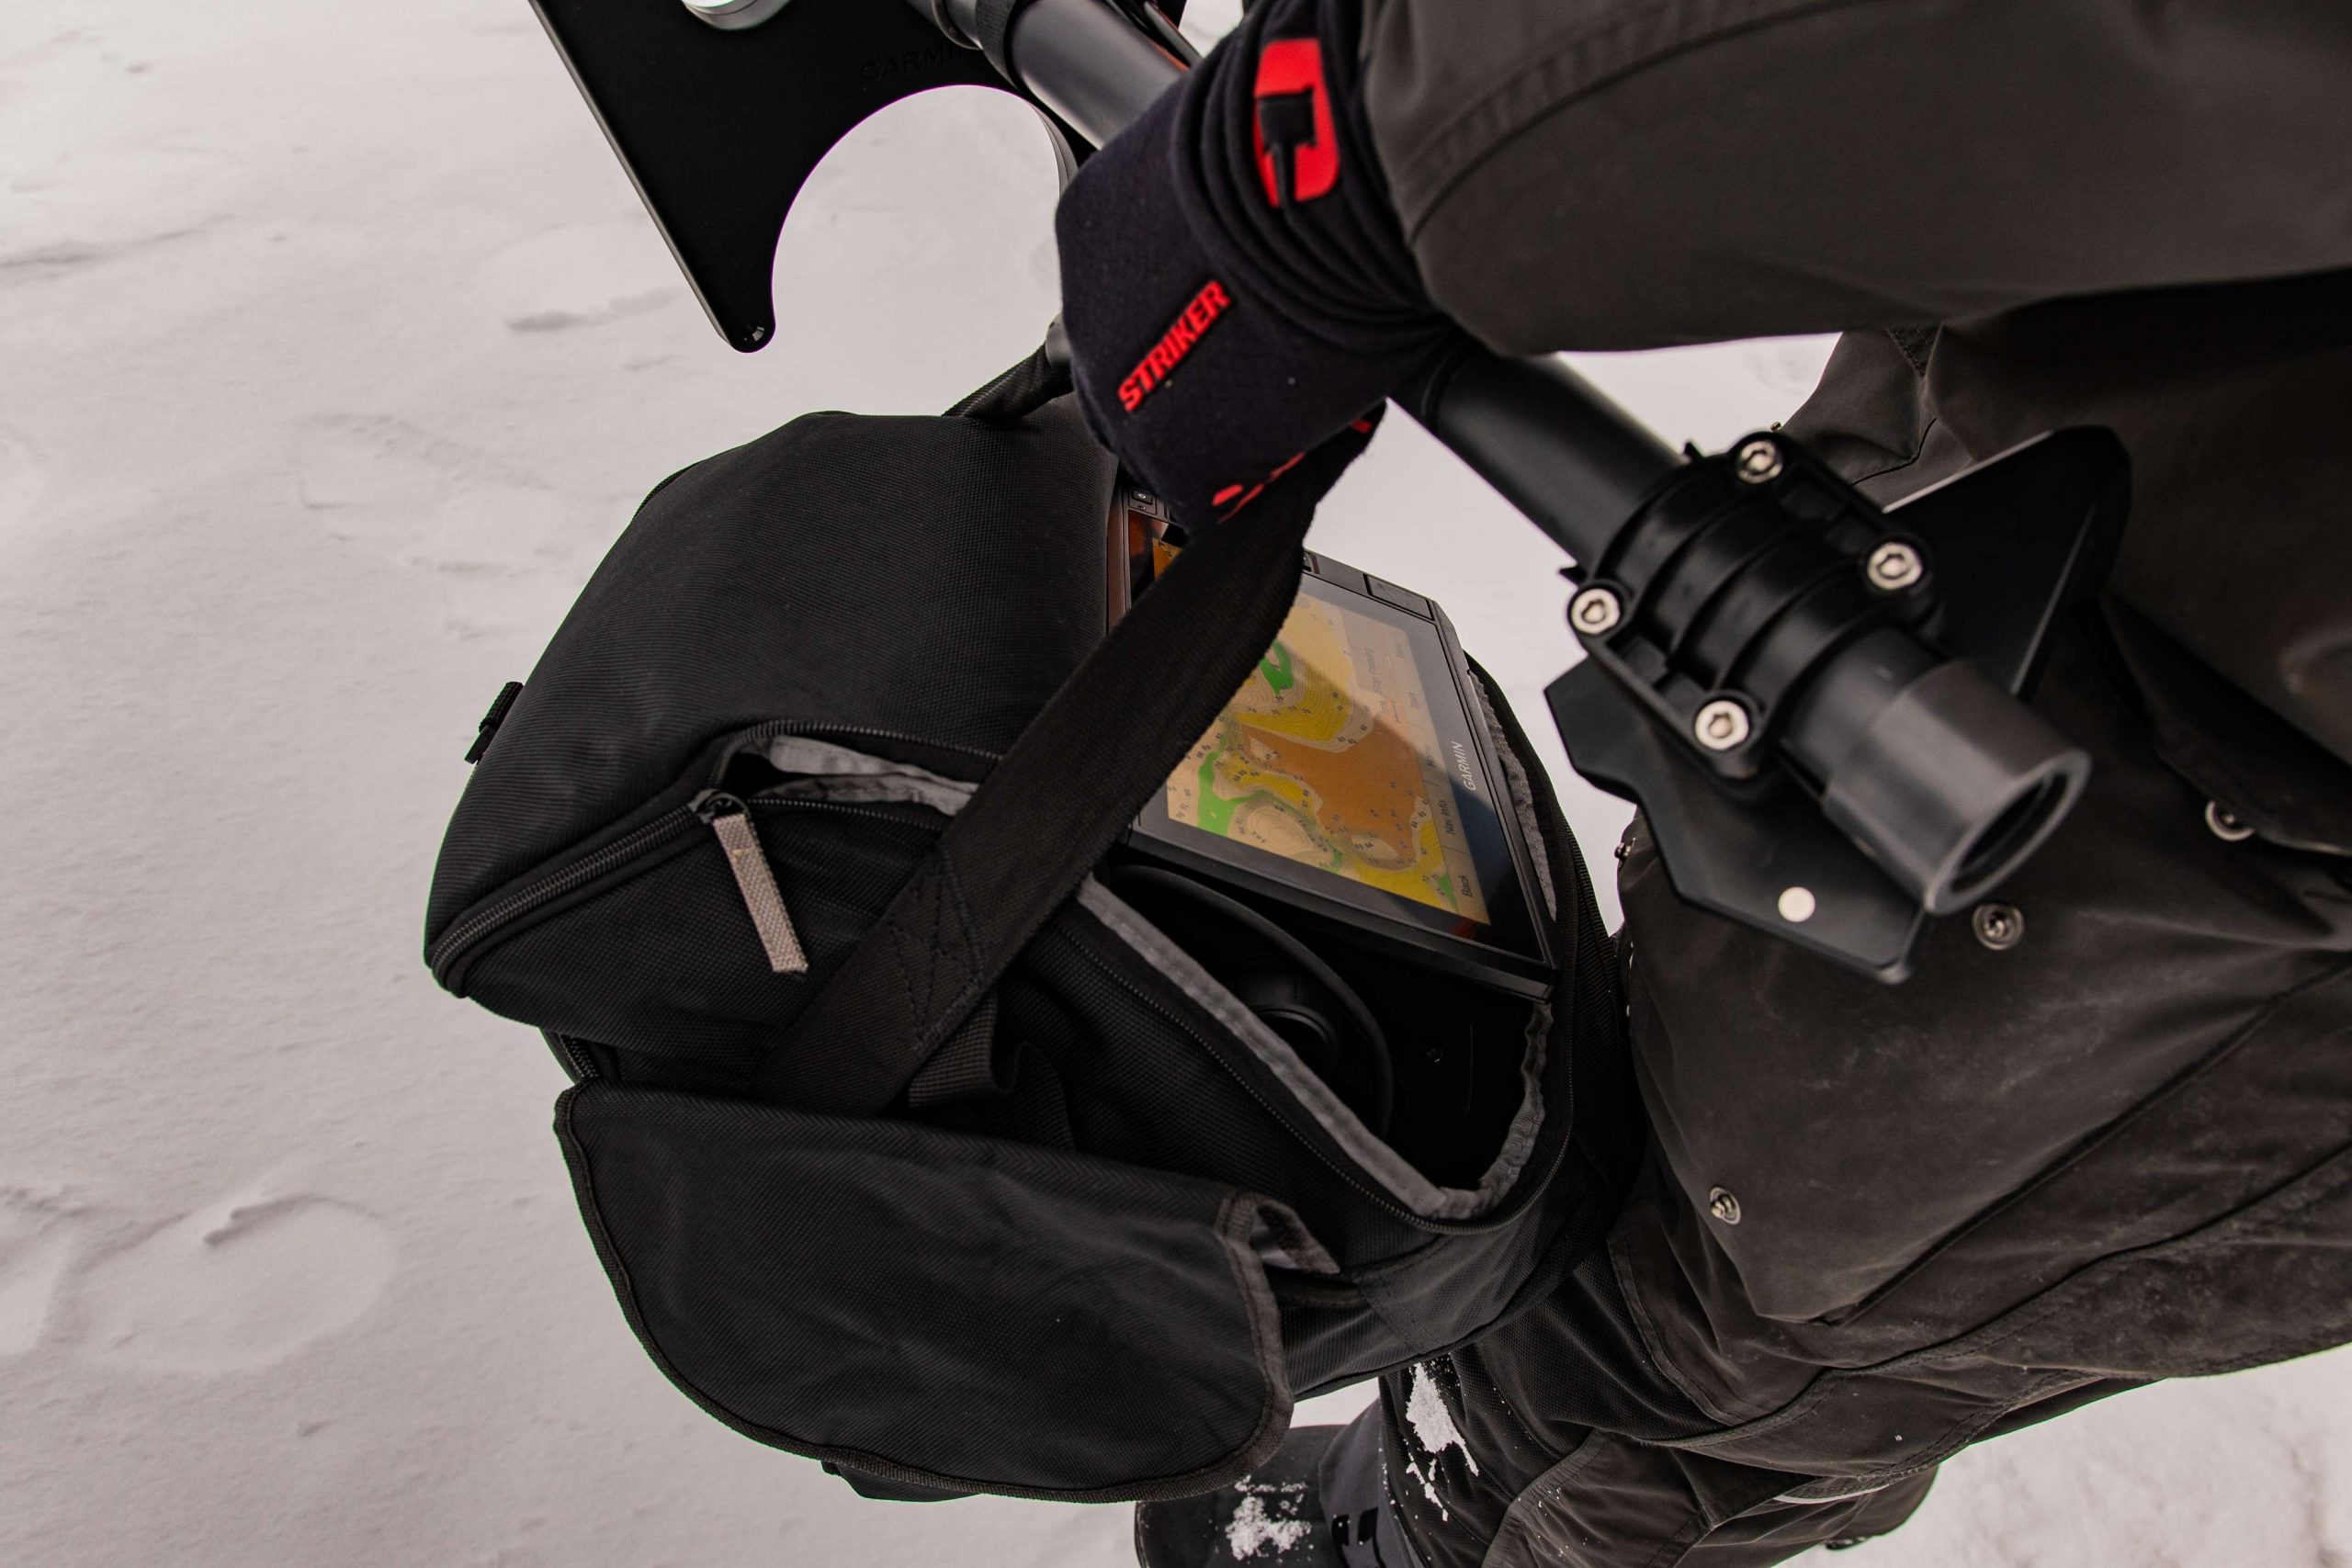 Mueller pulls all his gear in an Otter Ice Sled with a Hyfax Runner Kit, but when he gets to an area he likes, he grabs everything he needs to move around and look for fish all while staring at his Garmin map.